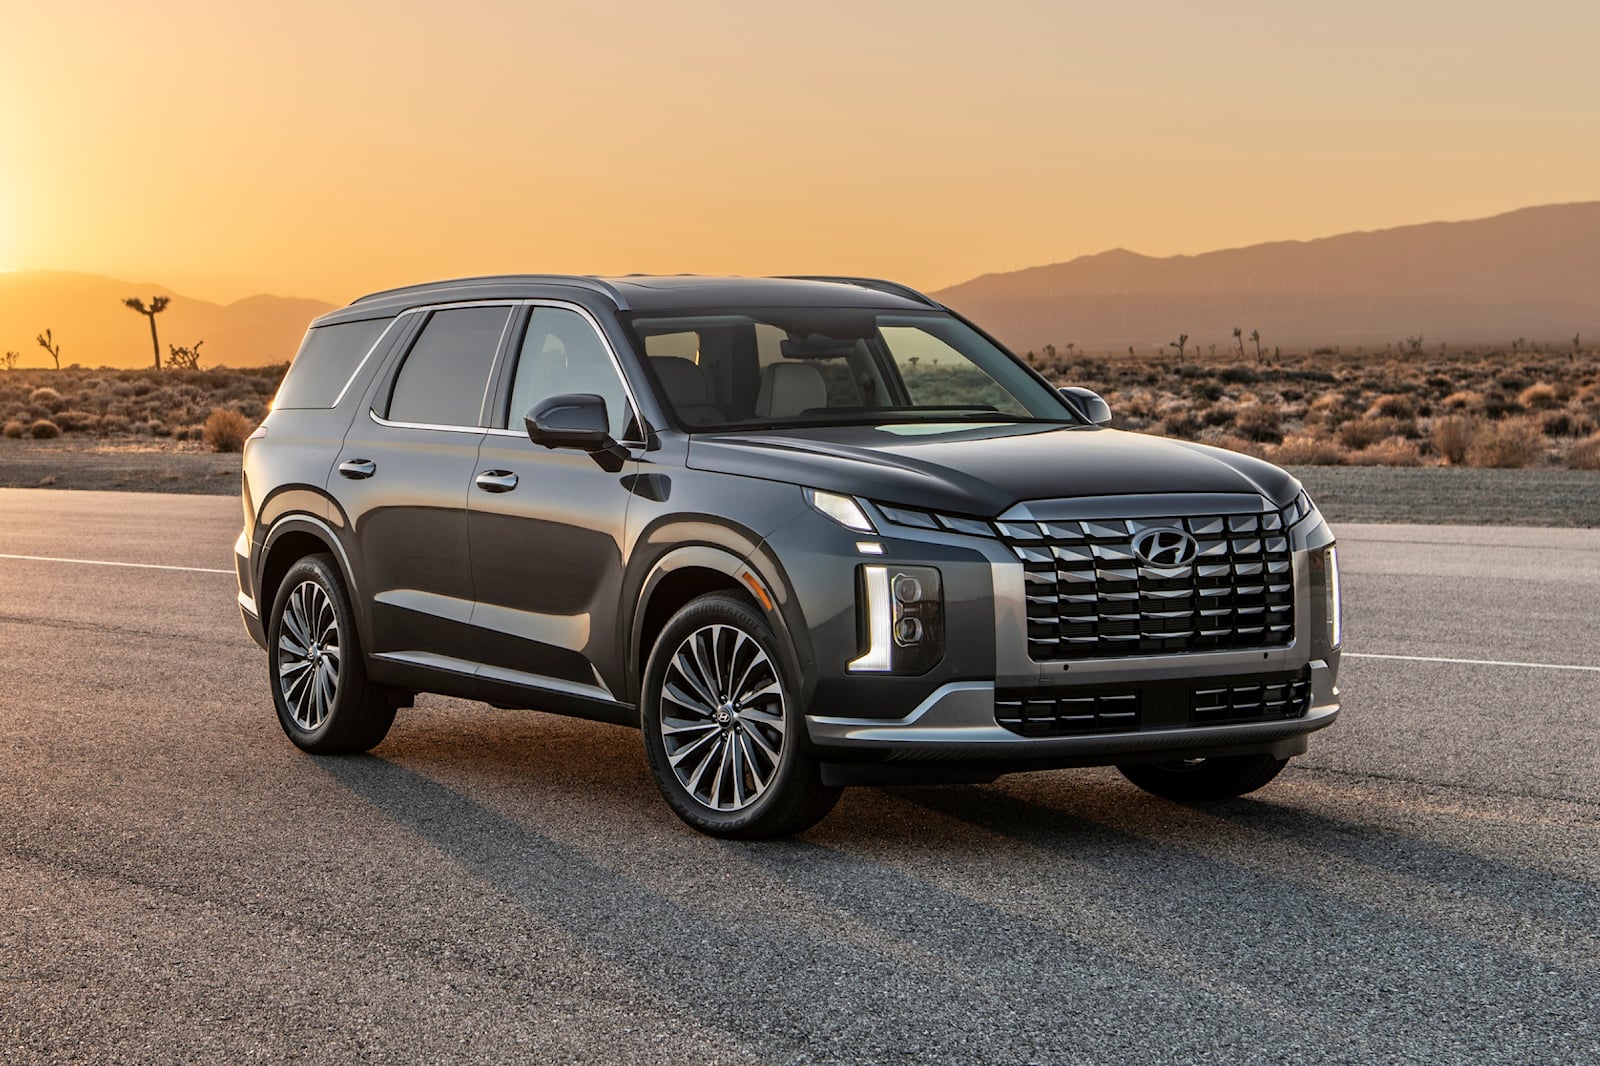 Used 2023 Hyundai Palisade in Libertyville, IL For Sale | CarBuzz